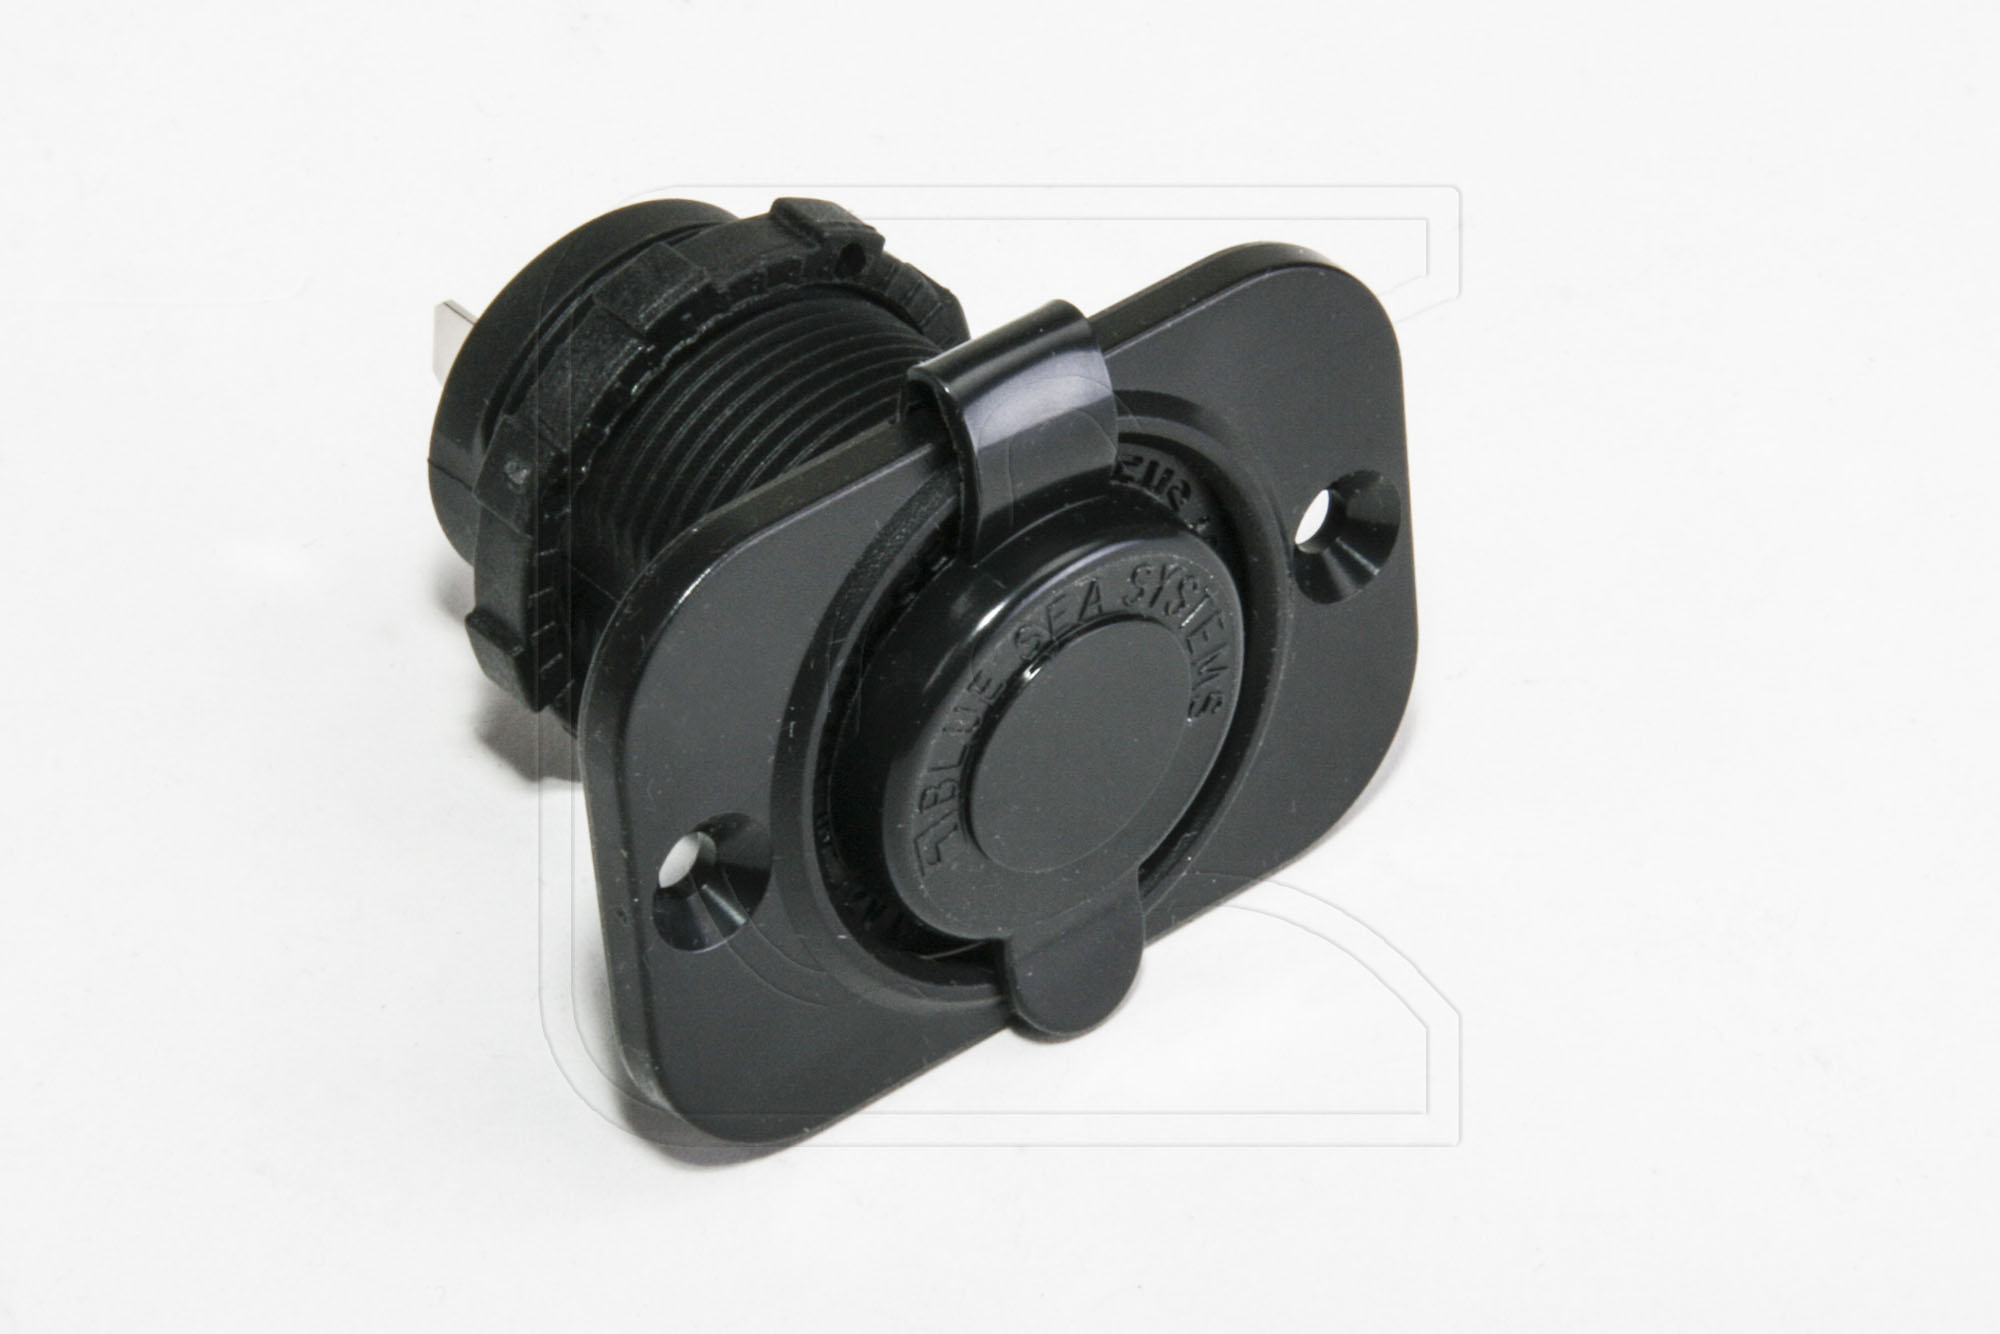 Dual USB flush-mounting socket with cover